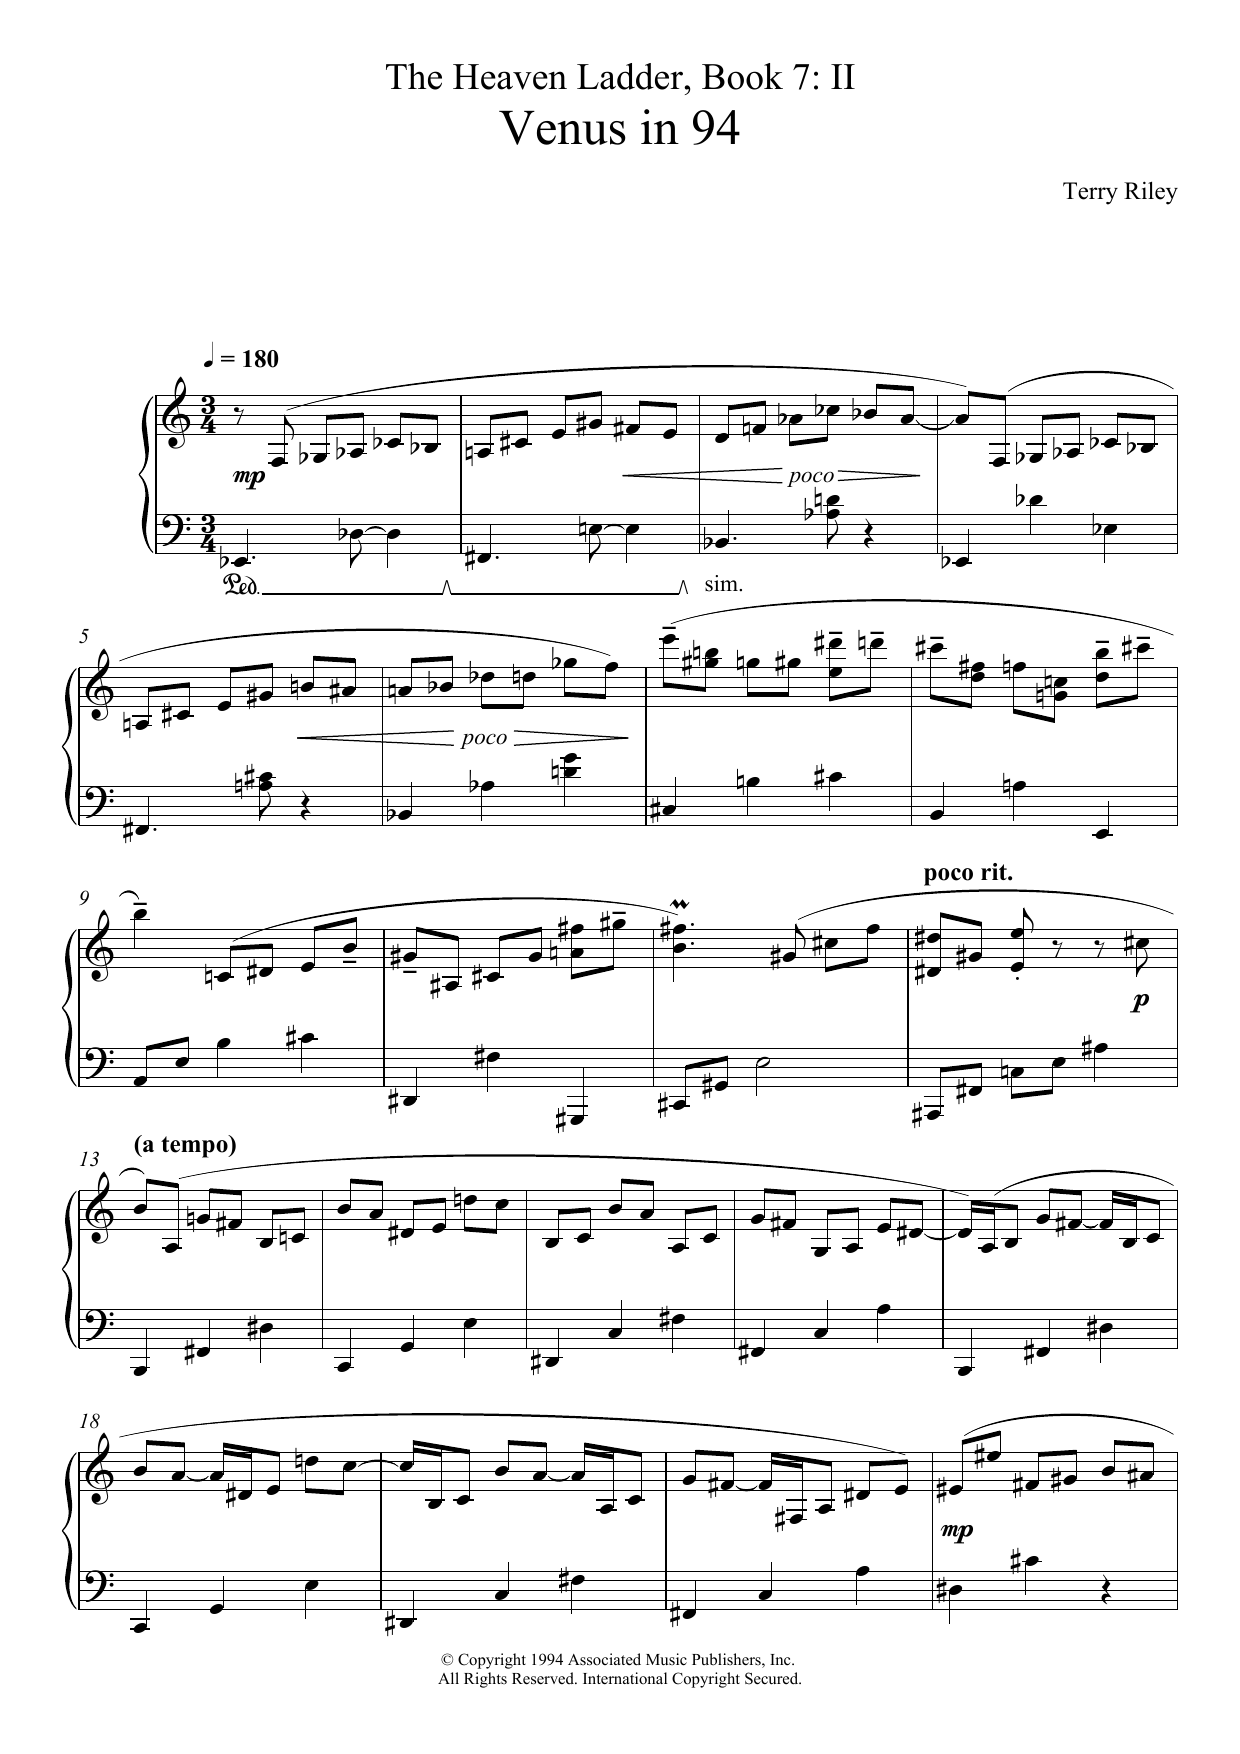 Download Terry Riley Venus In 94 (No.2 From The Heaven Ladde Sheet Music